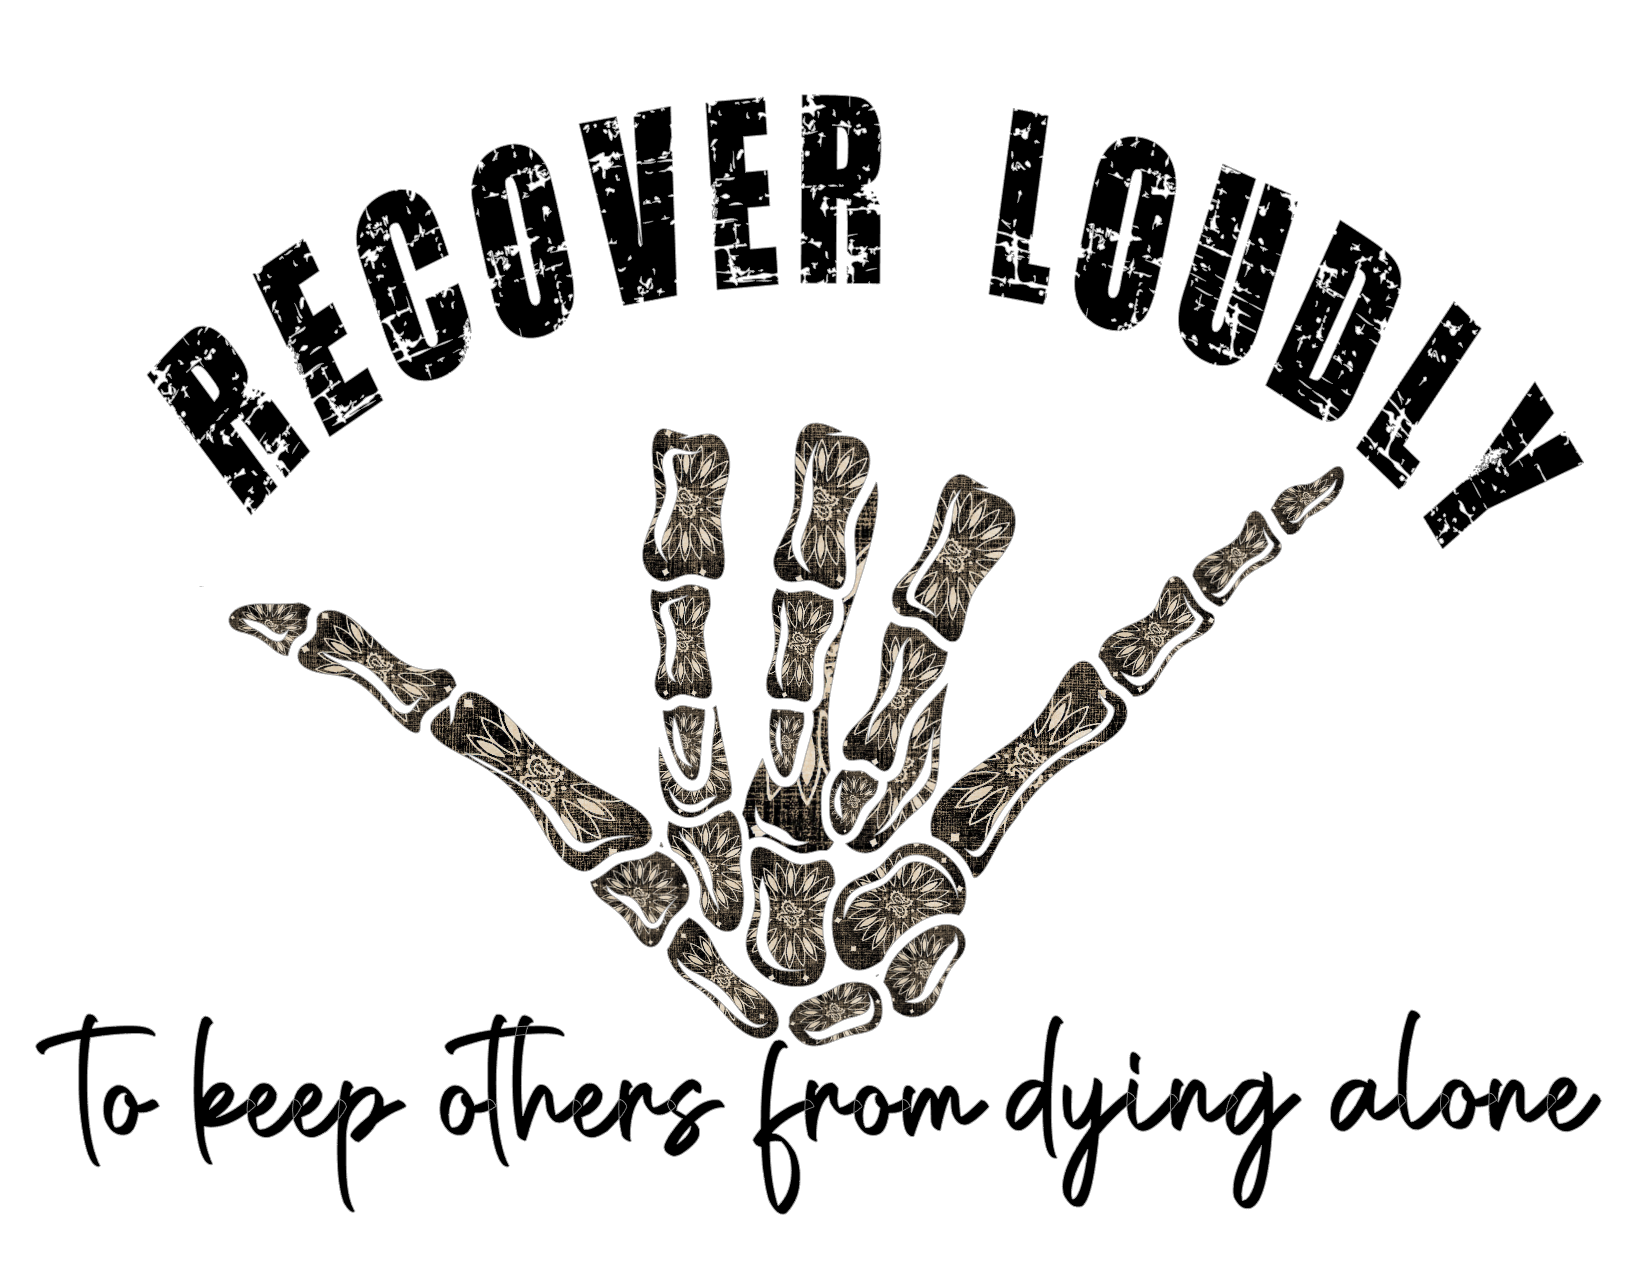 #478 Recover Loudly to keep others from dying alone